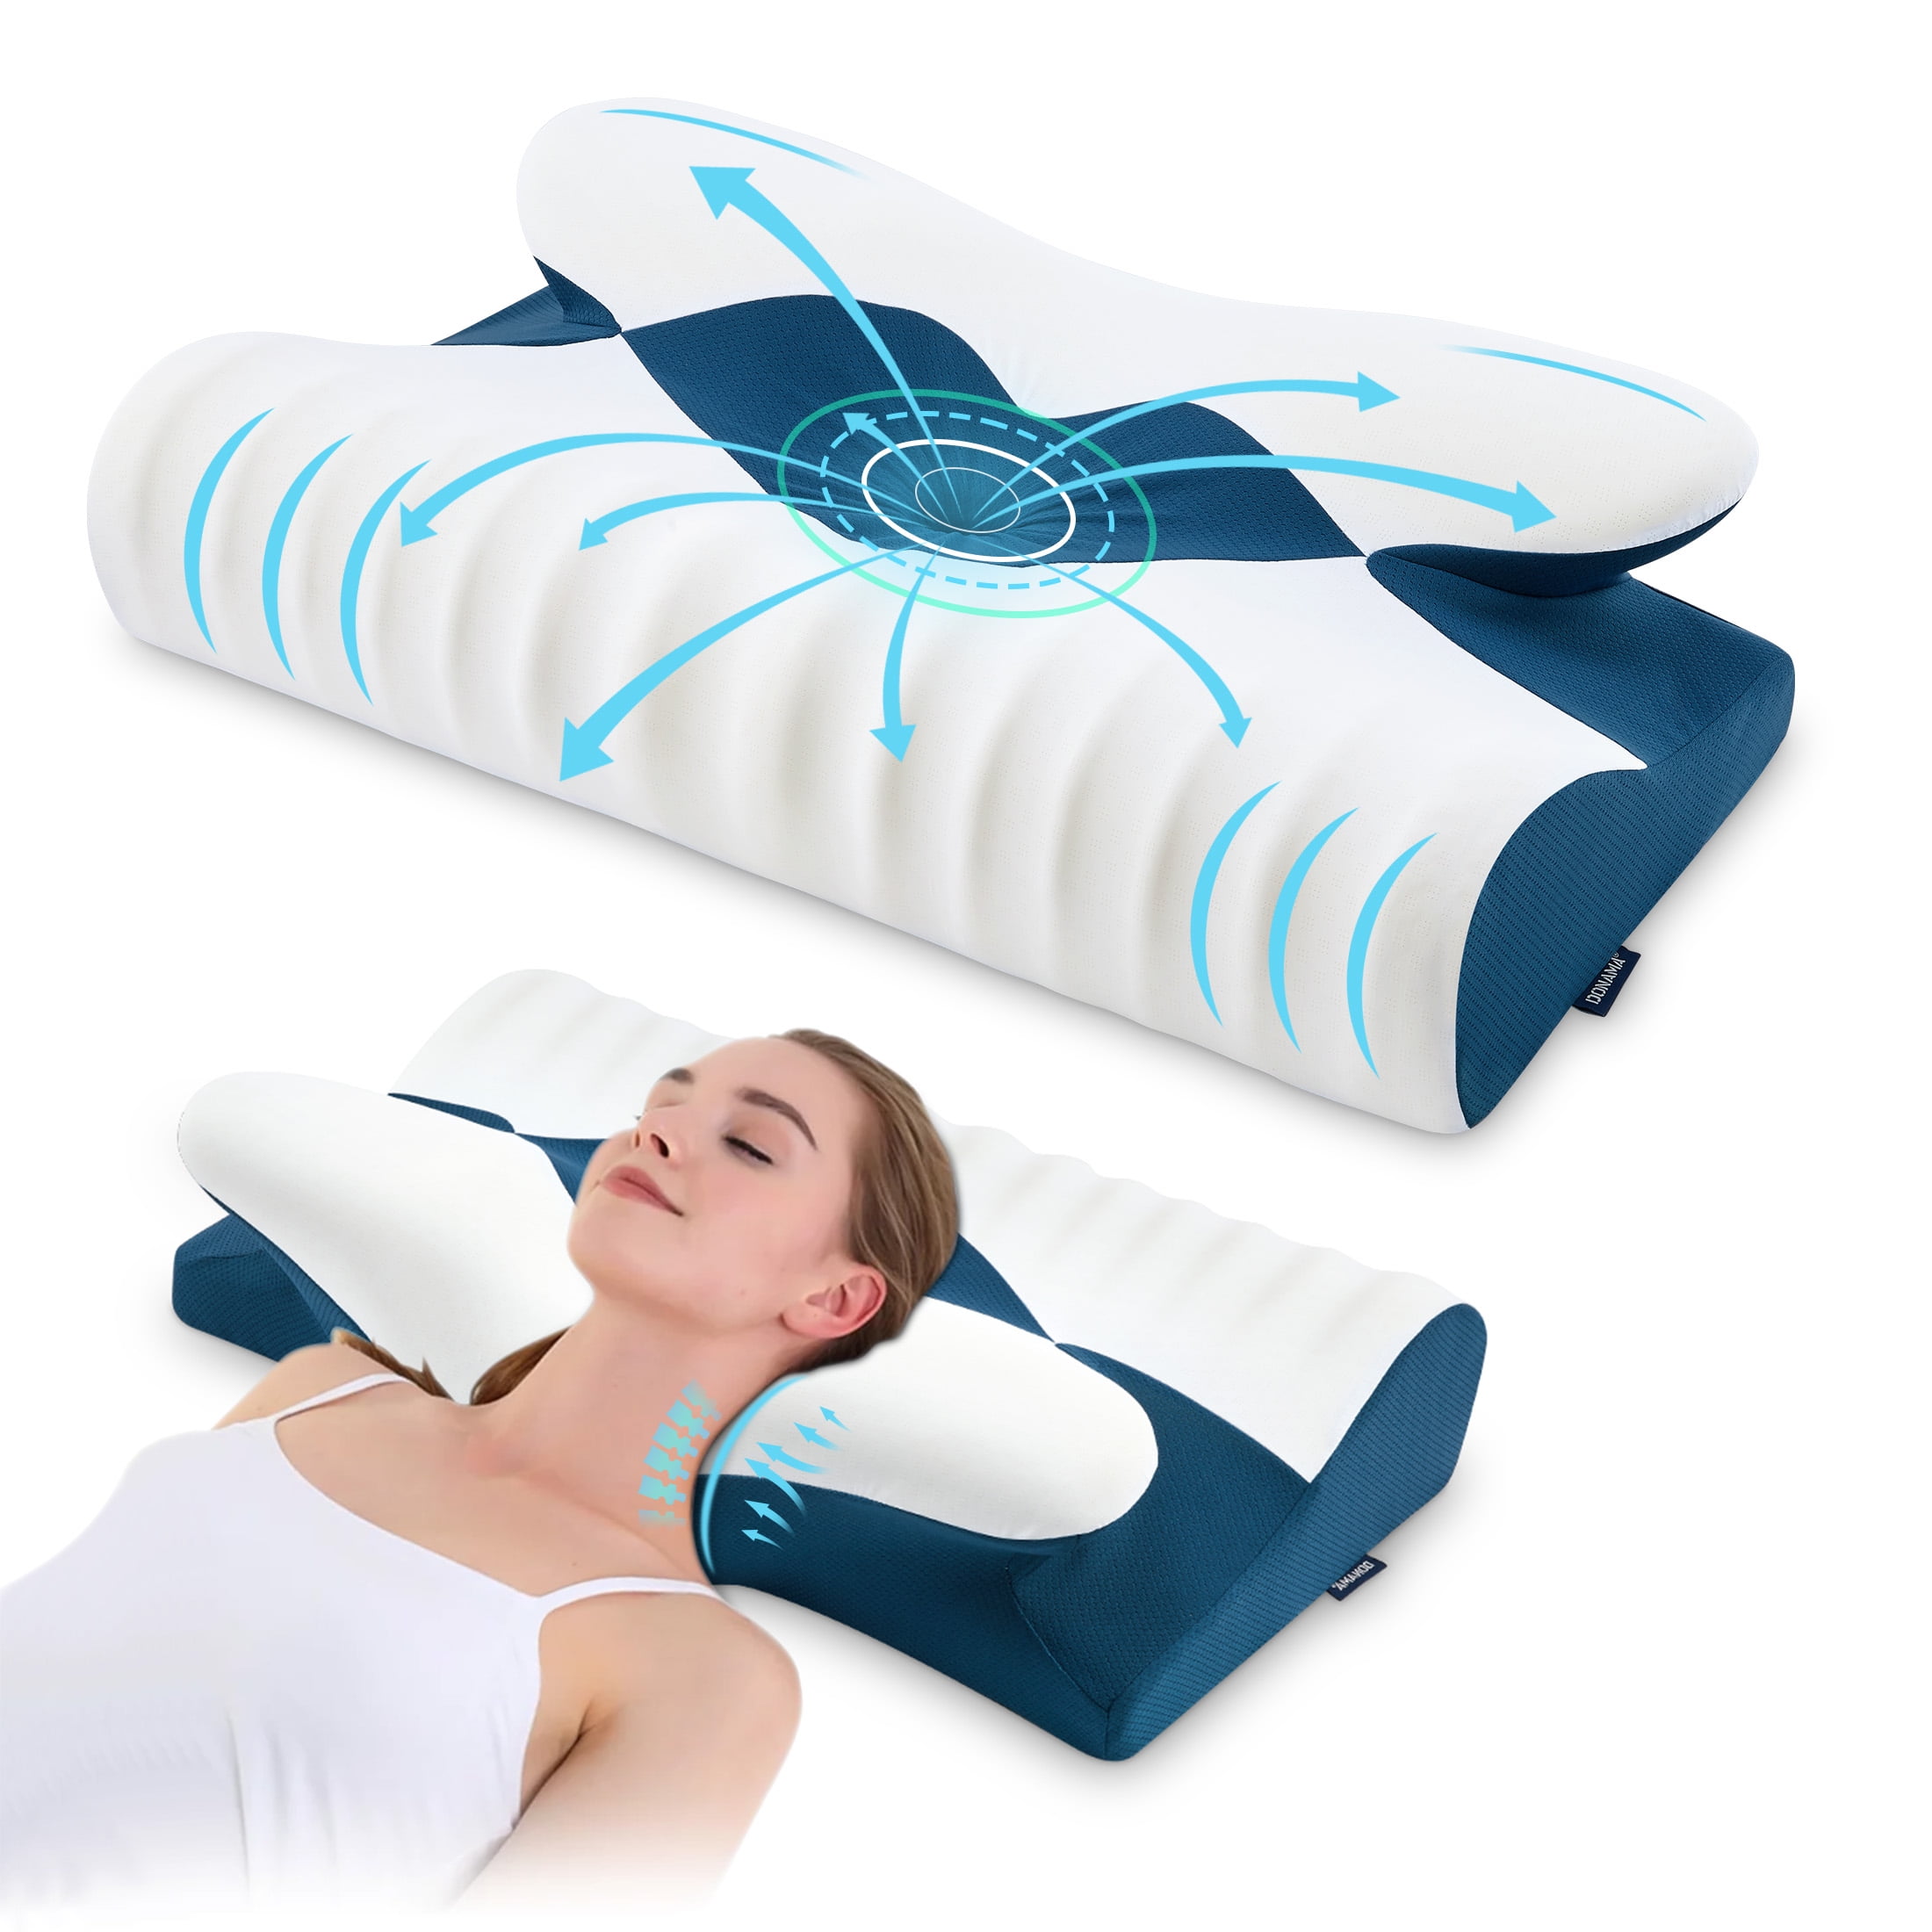 Memory Foam Cervical Pillow for Sleeping - Orthopedic Contoured